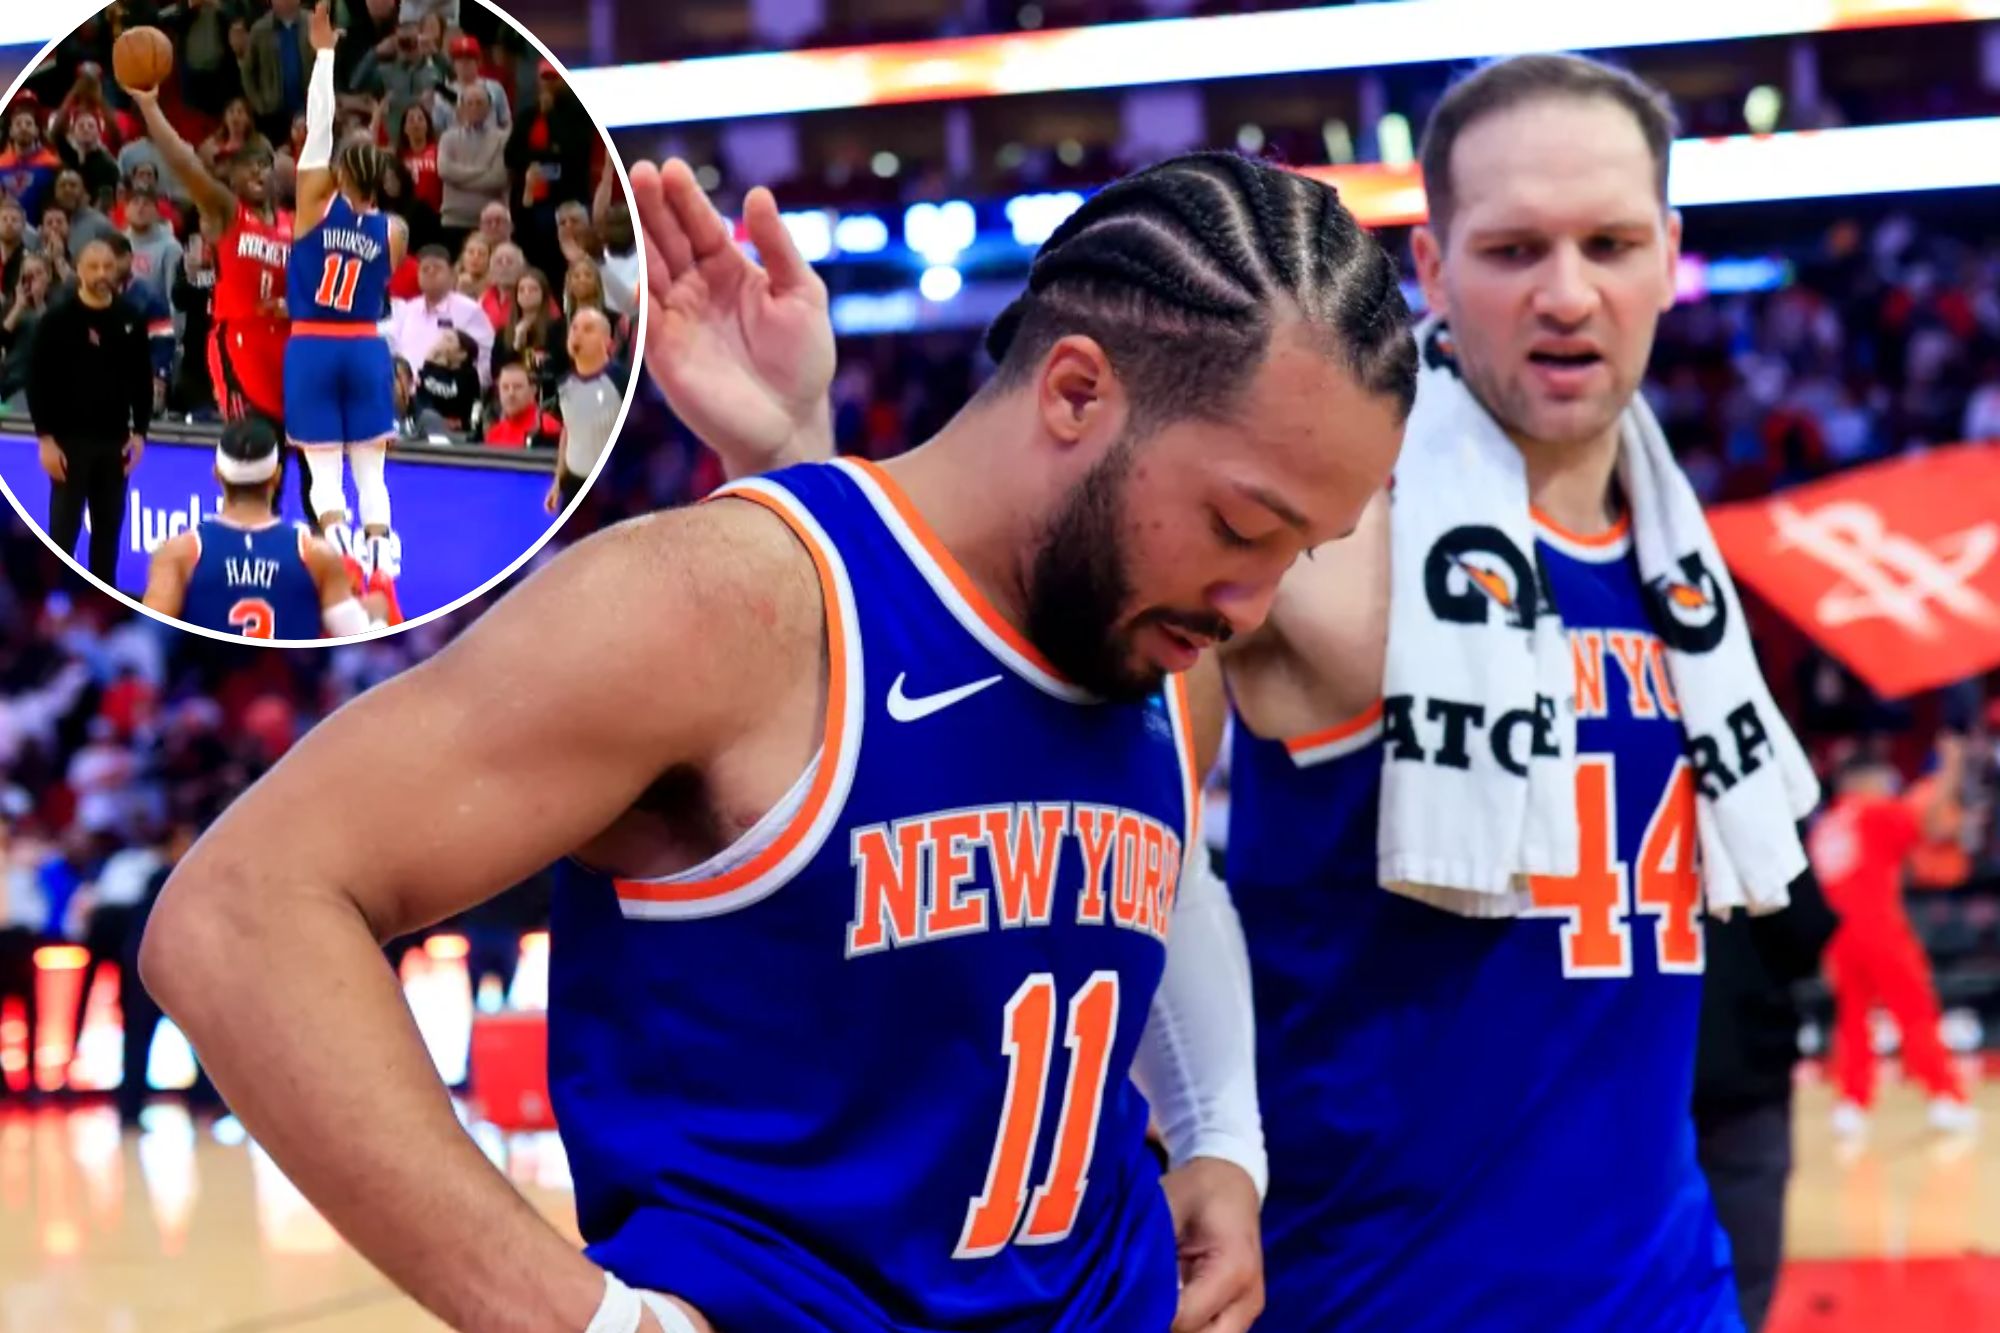 Knicks were shamefully jobbed out of chance to complete comeback